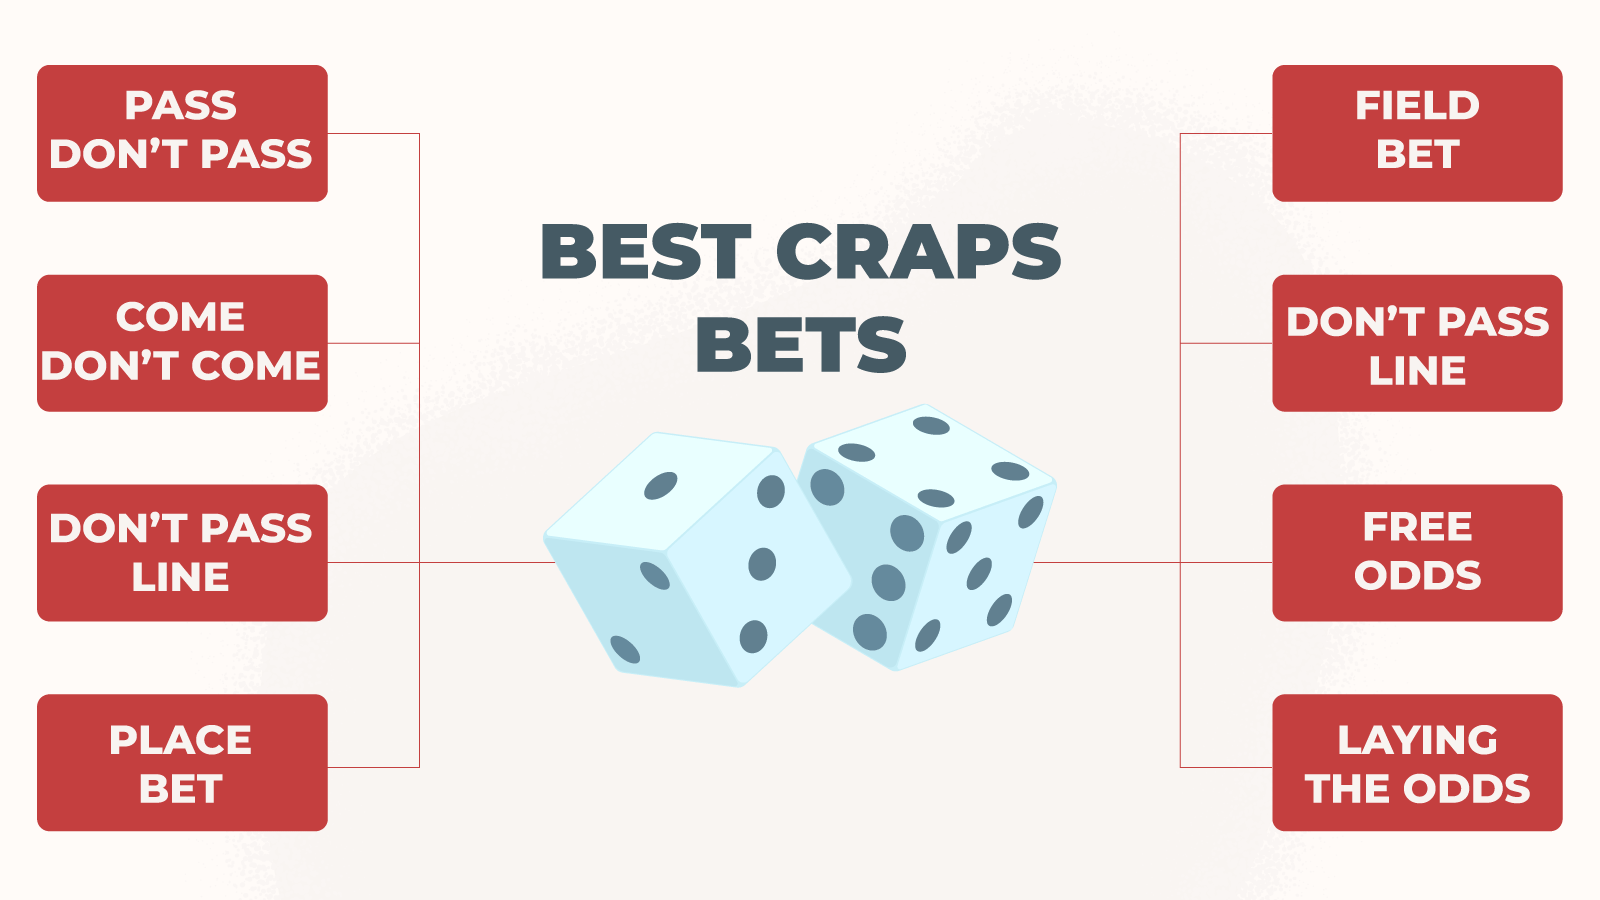 Bets with Best Craps Payouts and Odds